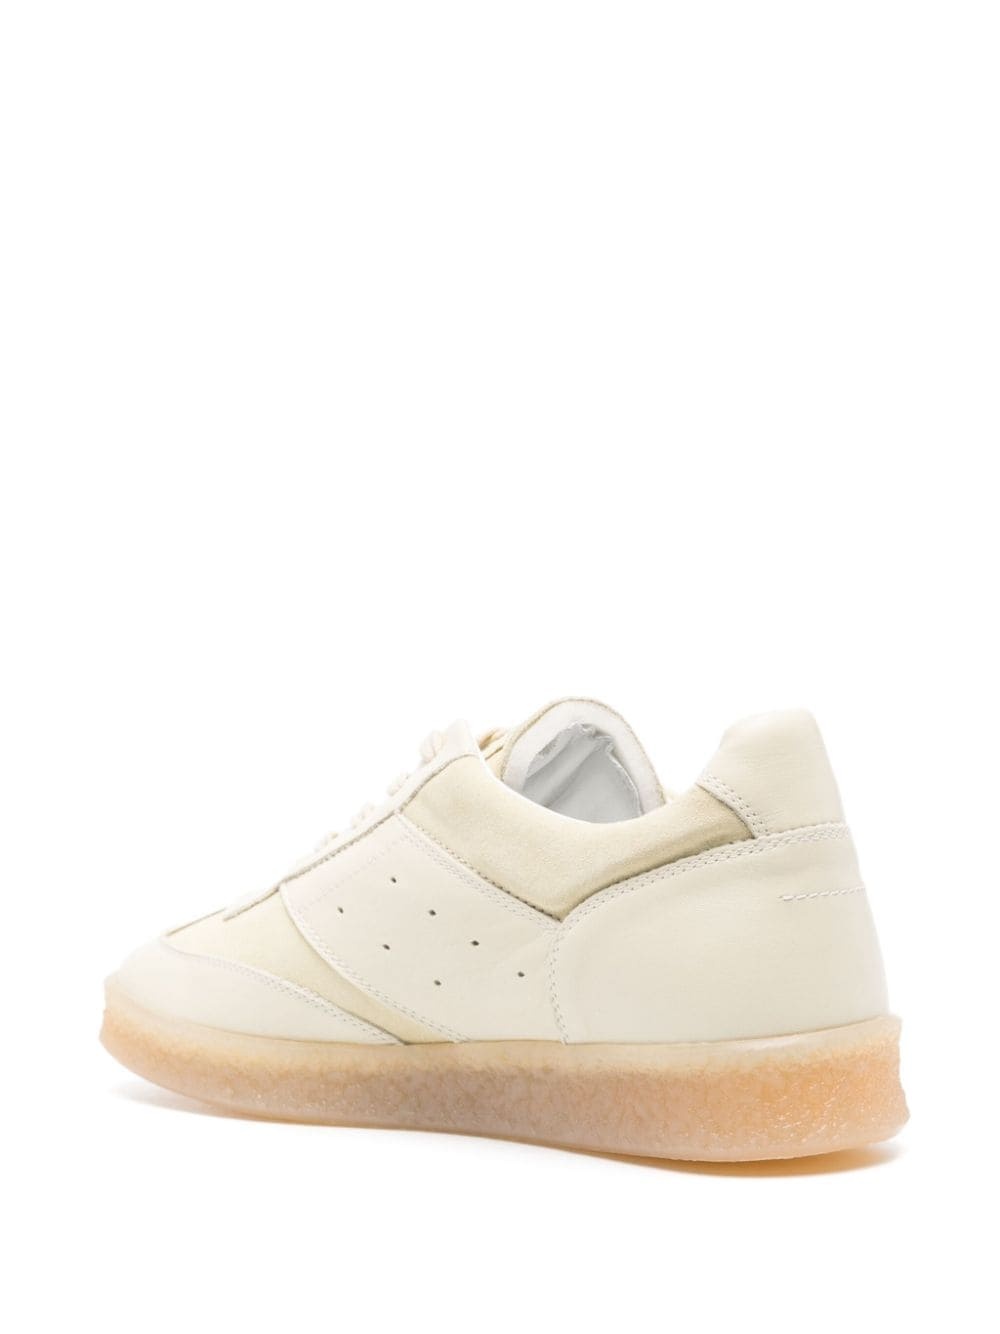 Replica panelled leather sneakers - 3